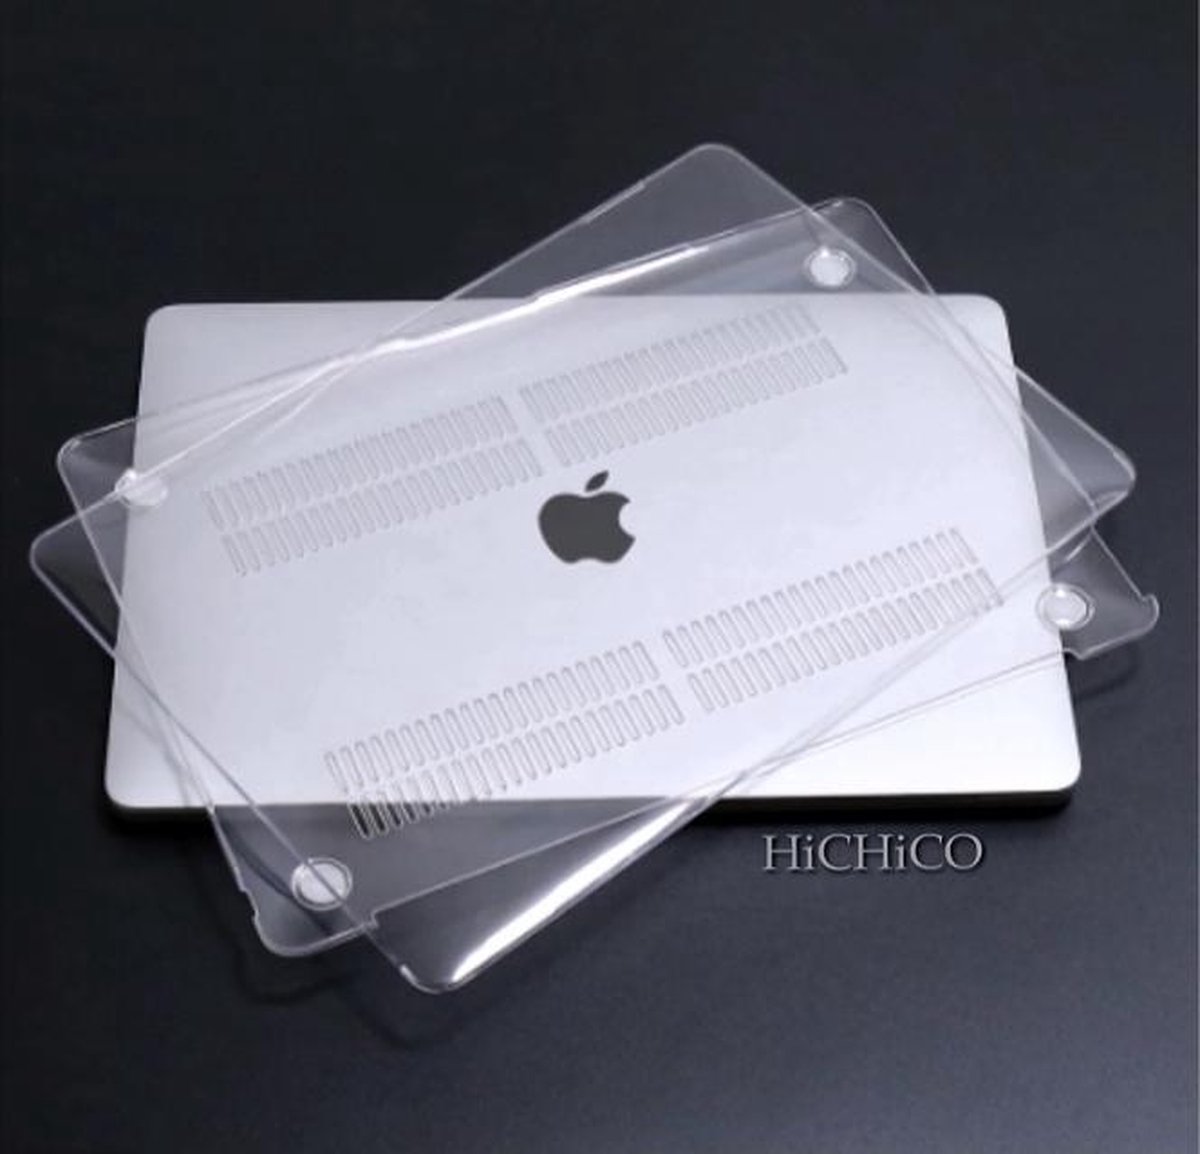 MacBook Air 13 inch (2019) ) HiCHiCO MacBook Hoes - Laptophoes - macbook Air case - Laptop Cover - Clear Hard Case – HiCHiCO MacBook Air Hoes Transparant